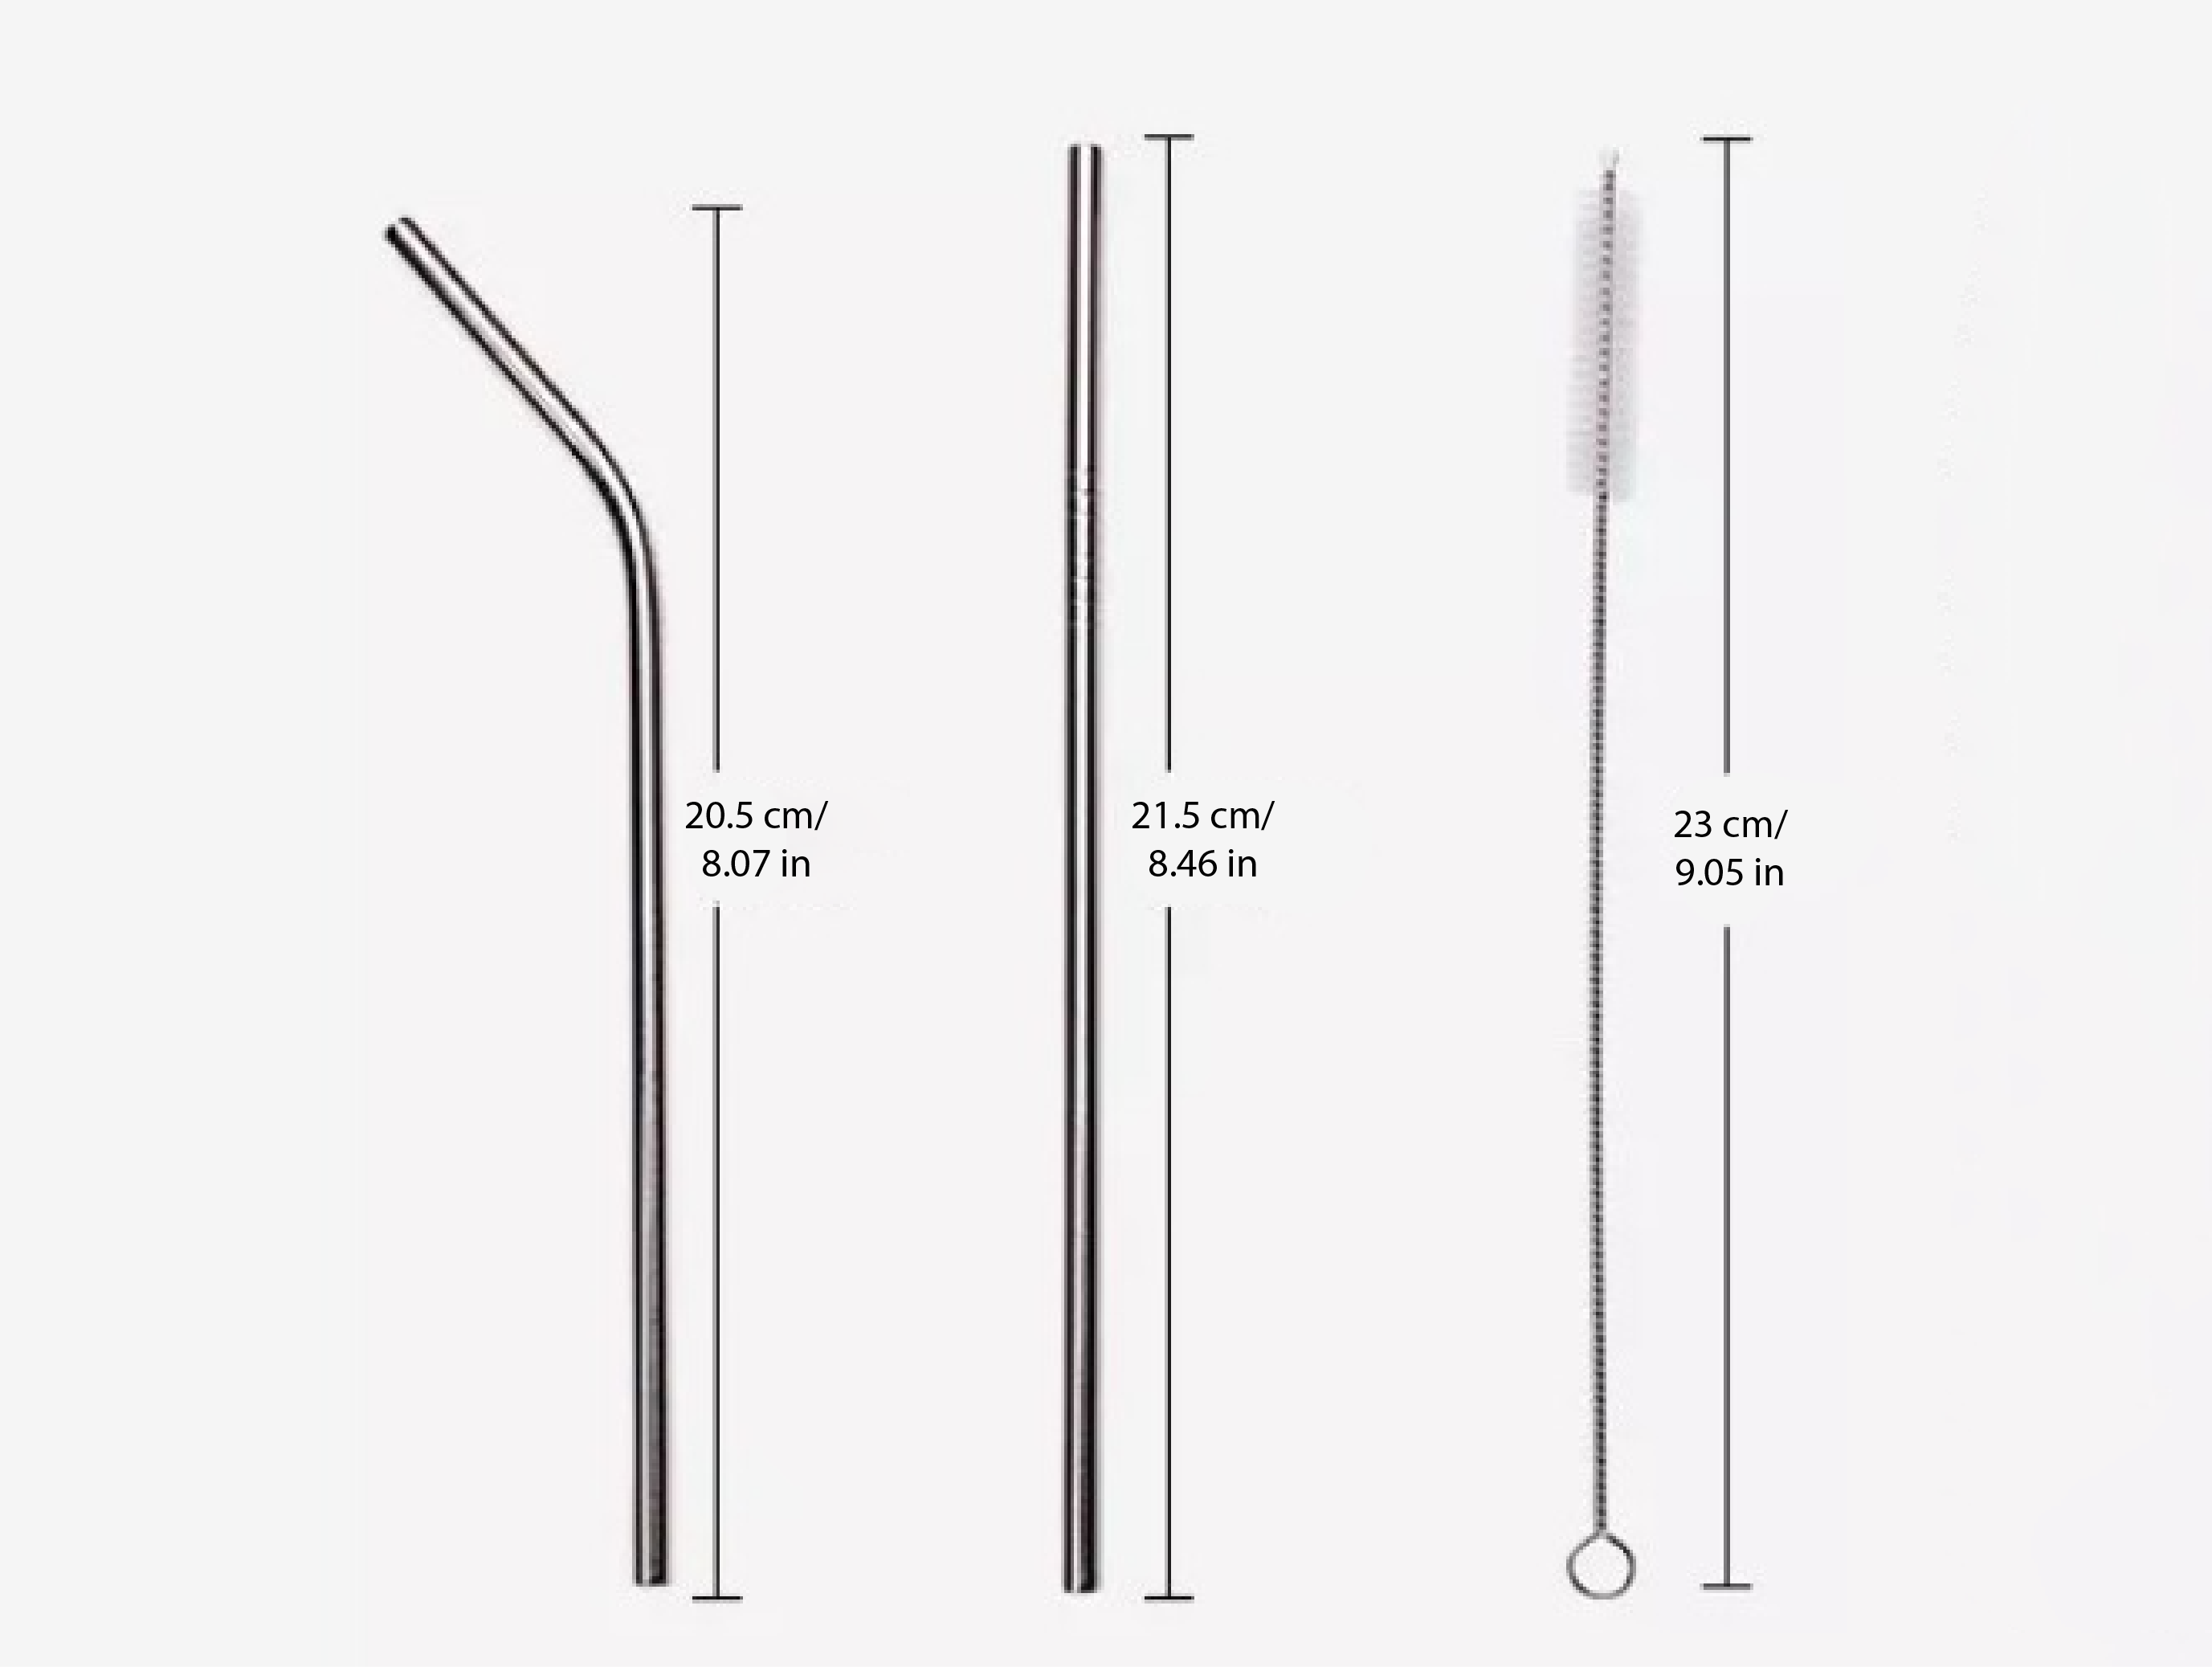 Eco-friendly 8-Pack of stainless steel, reusable drinking straws. Made with high-quality 304 stainless steel. Product Lengths.